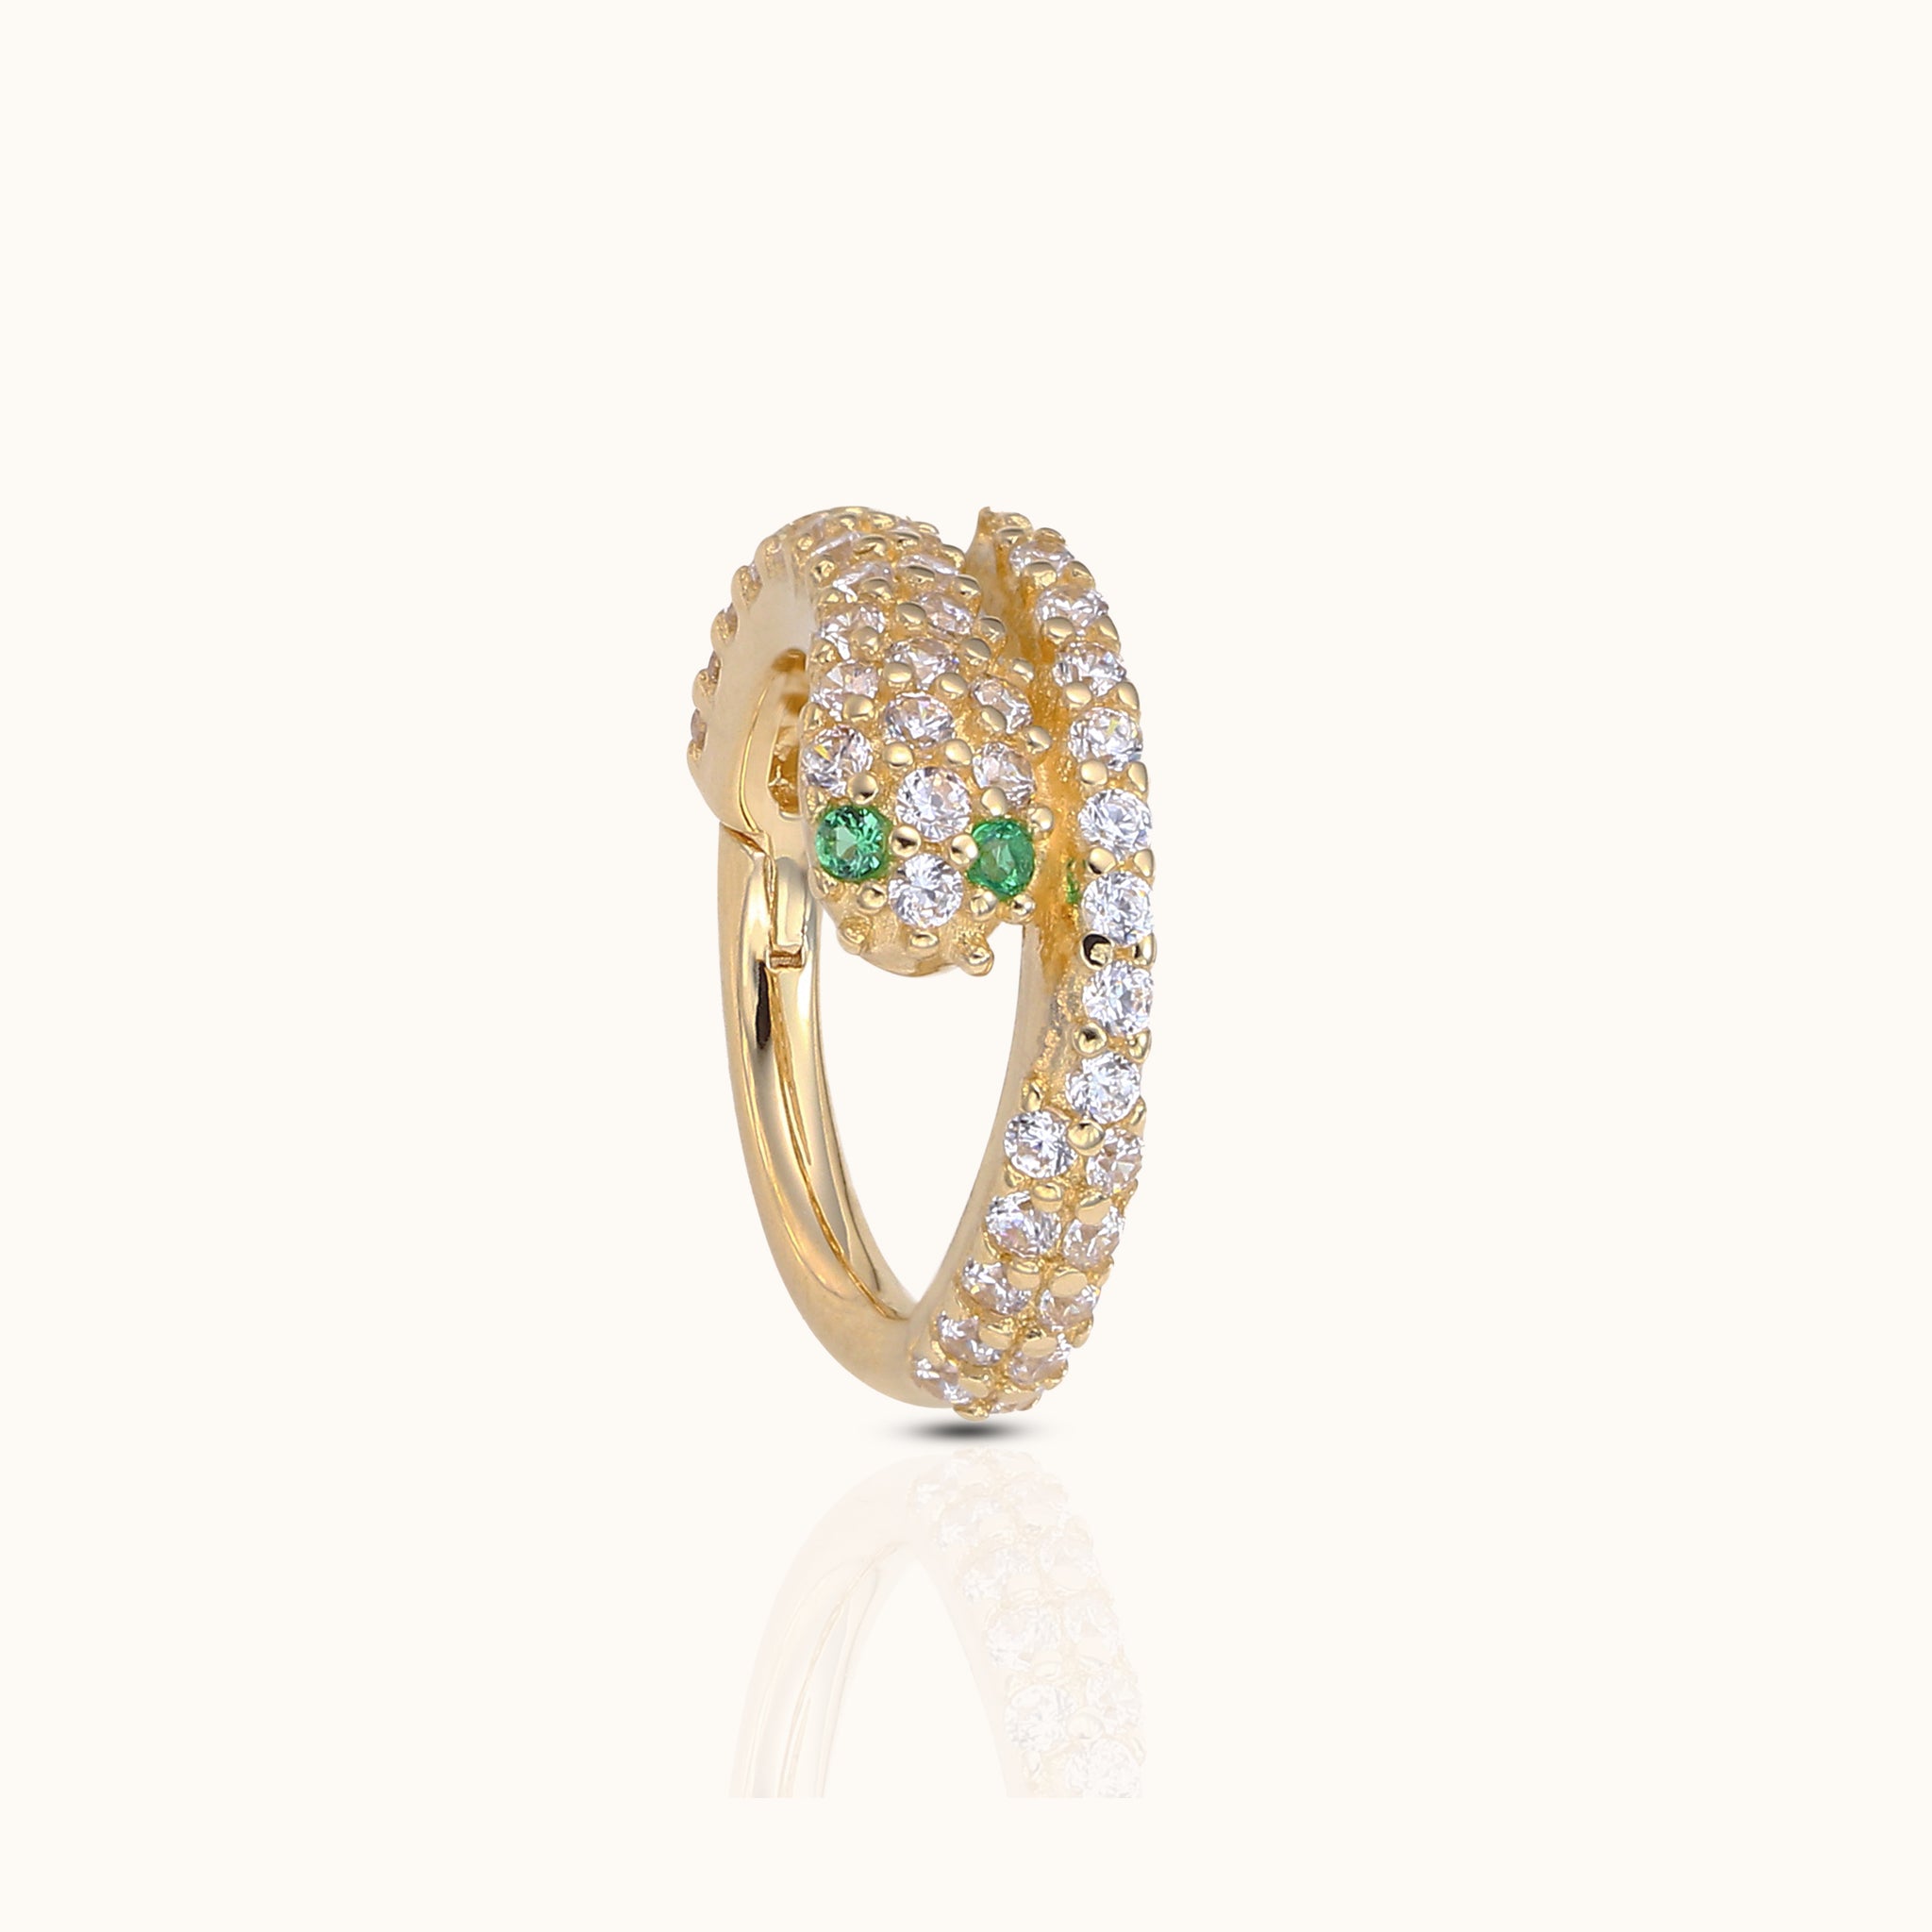 14K Solid Gold CZ Snake with Green Eyes Clicker Hoop Earring by Doviana